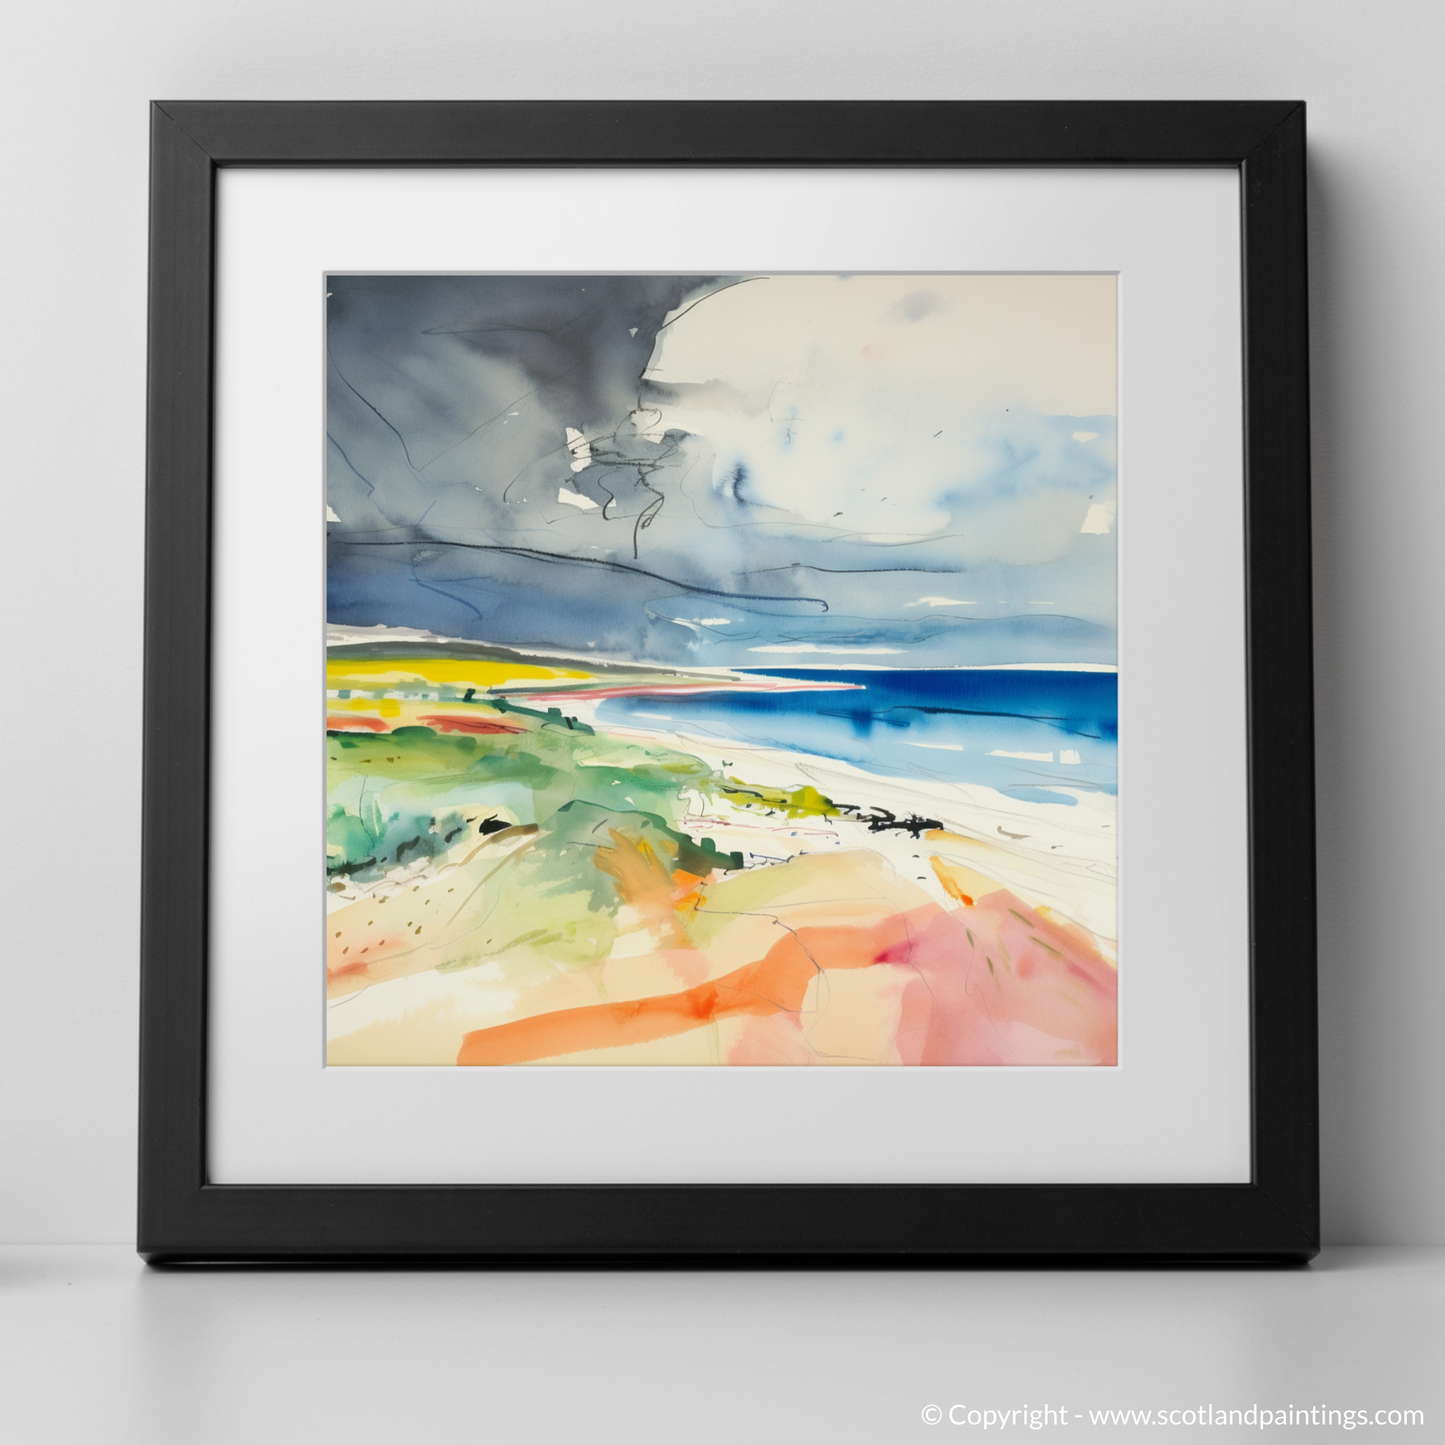 Storm's Embrace: An Abstract Vision of St Cyrus Beach